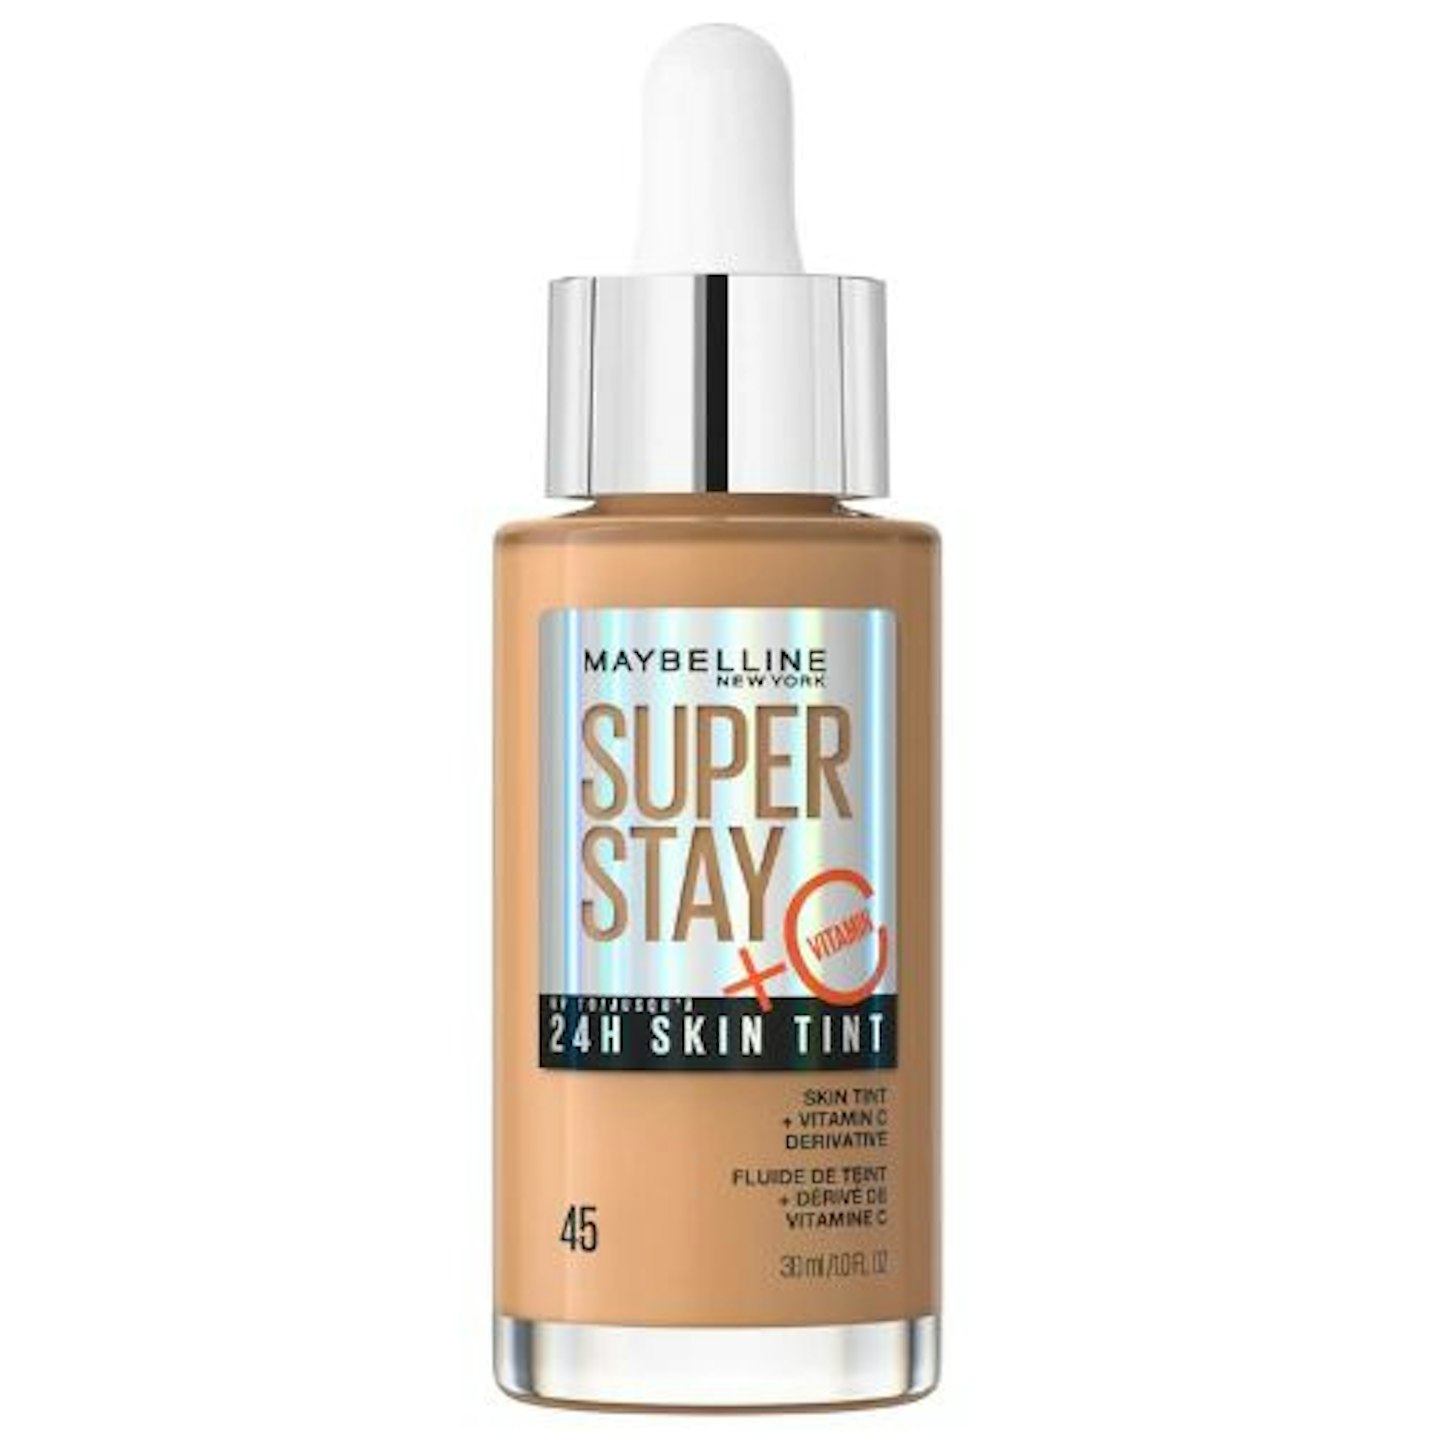 Maybelline Super Stay 24H Skin Tint 